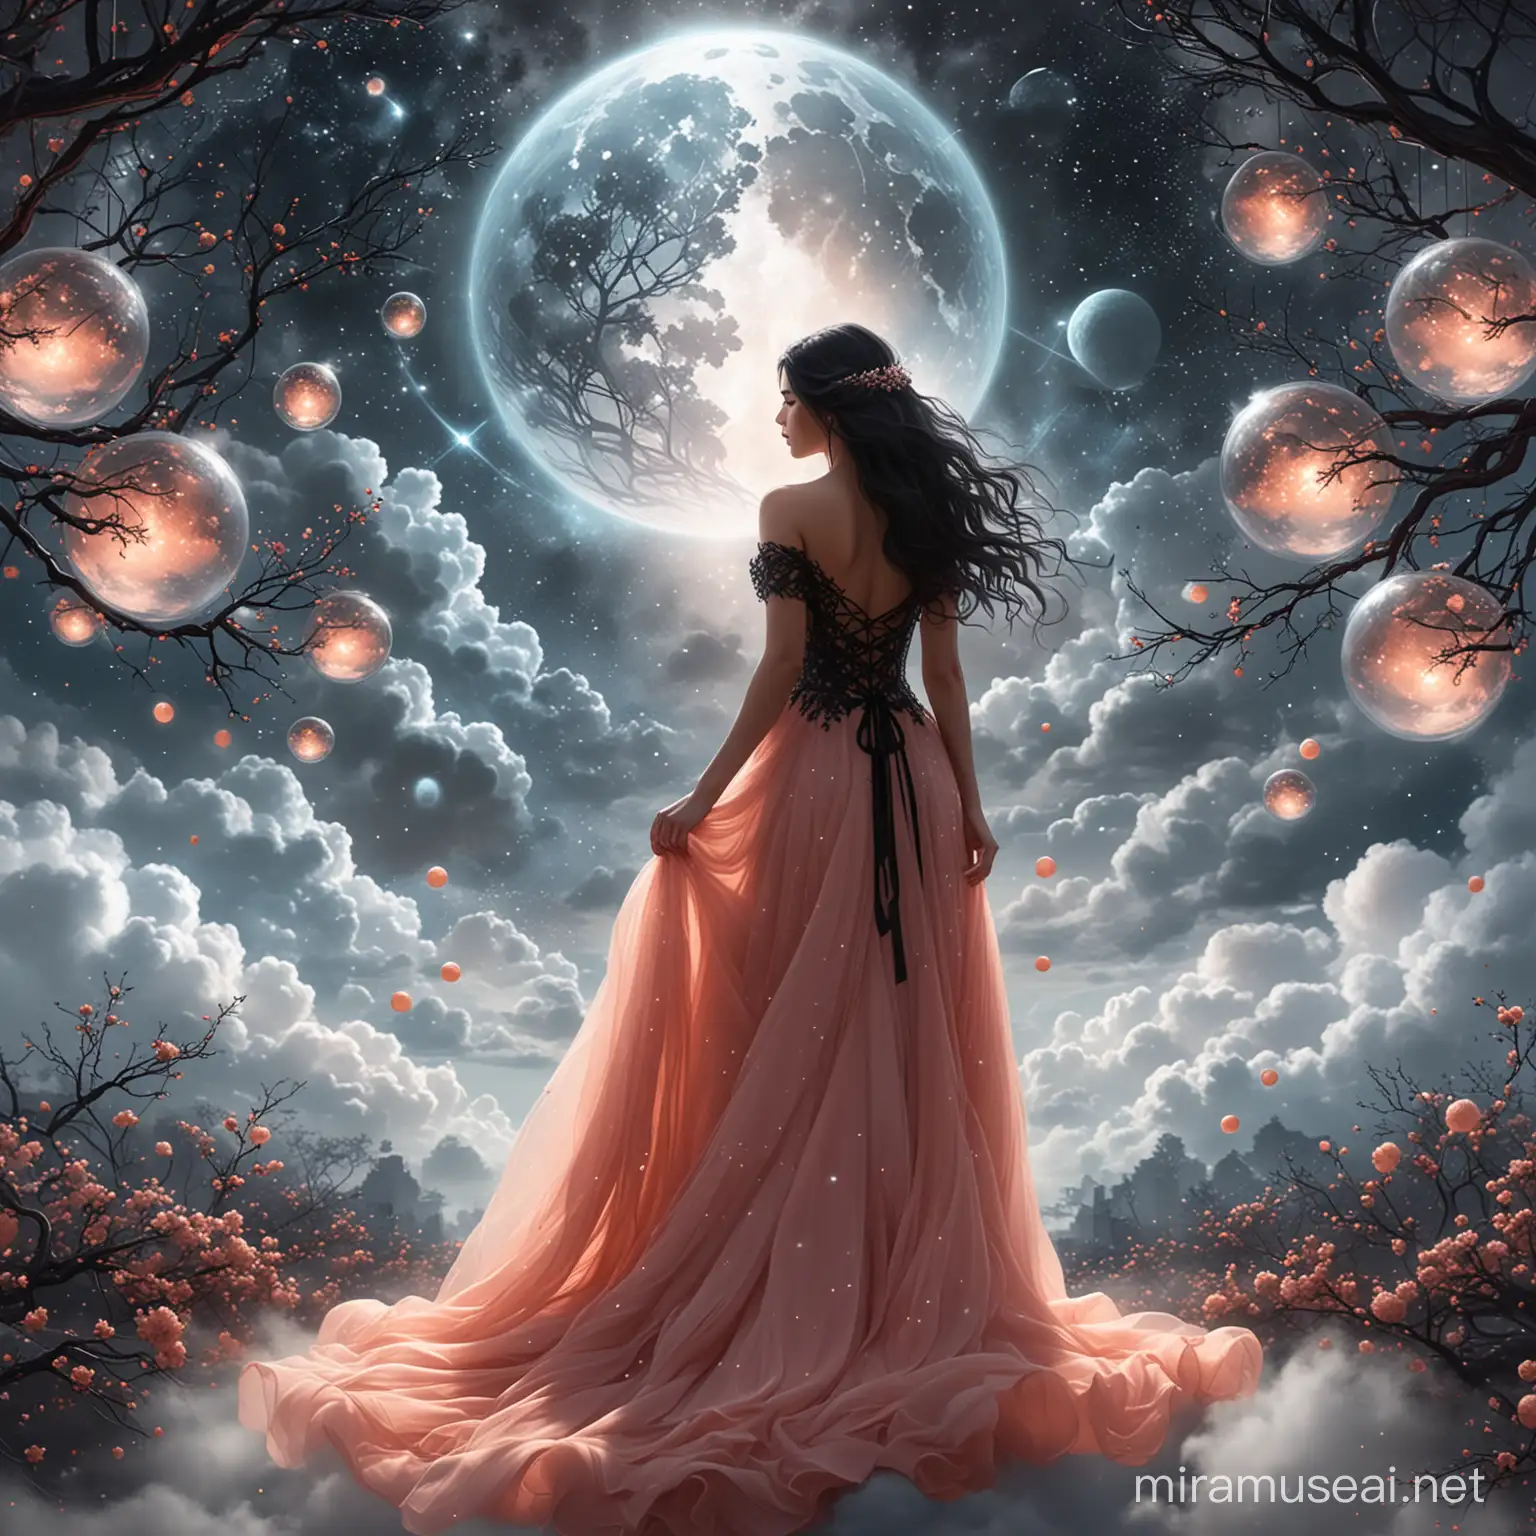 Elegant Woman Walking in Nebula Sky Amidst Giant Transparent Balls with Branches